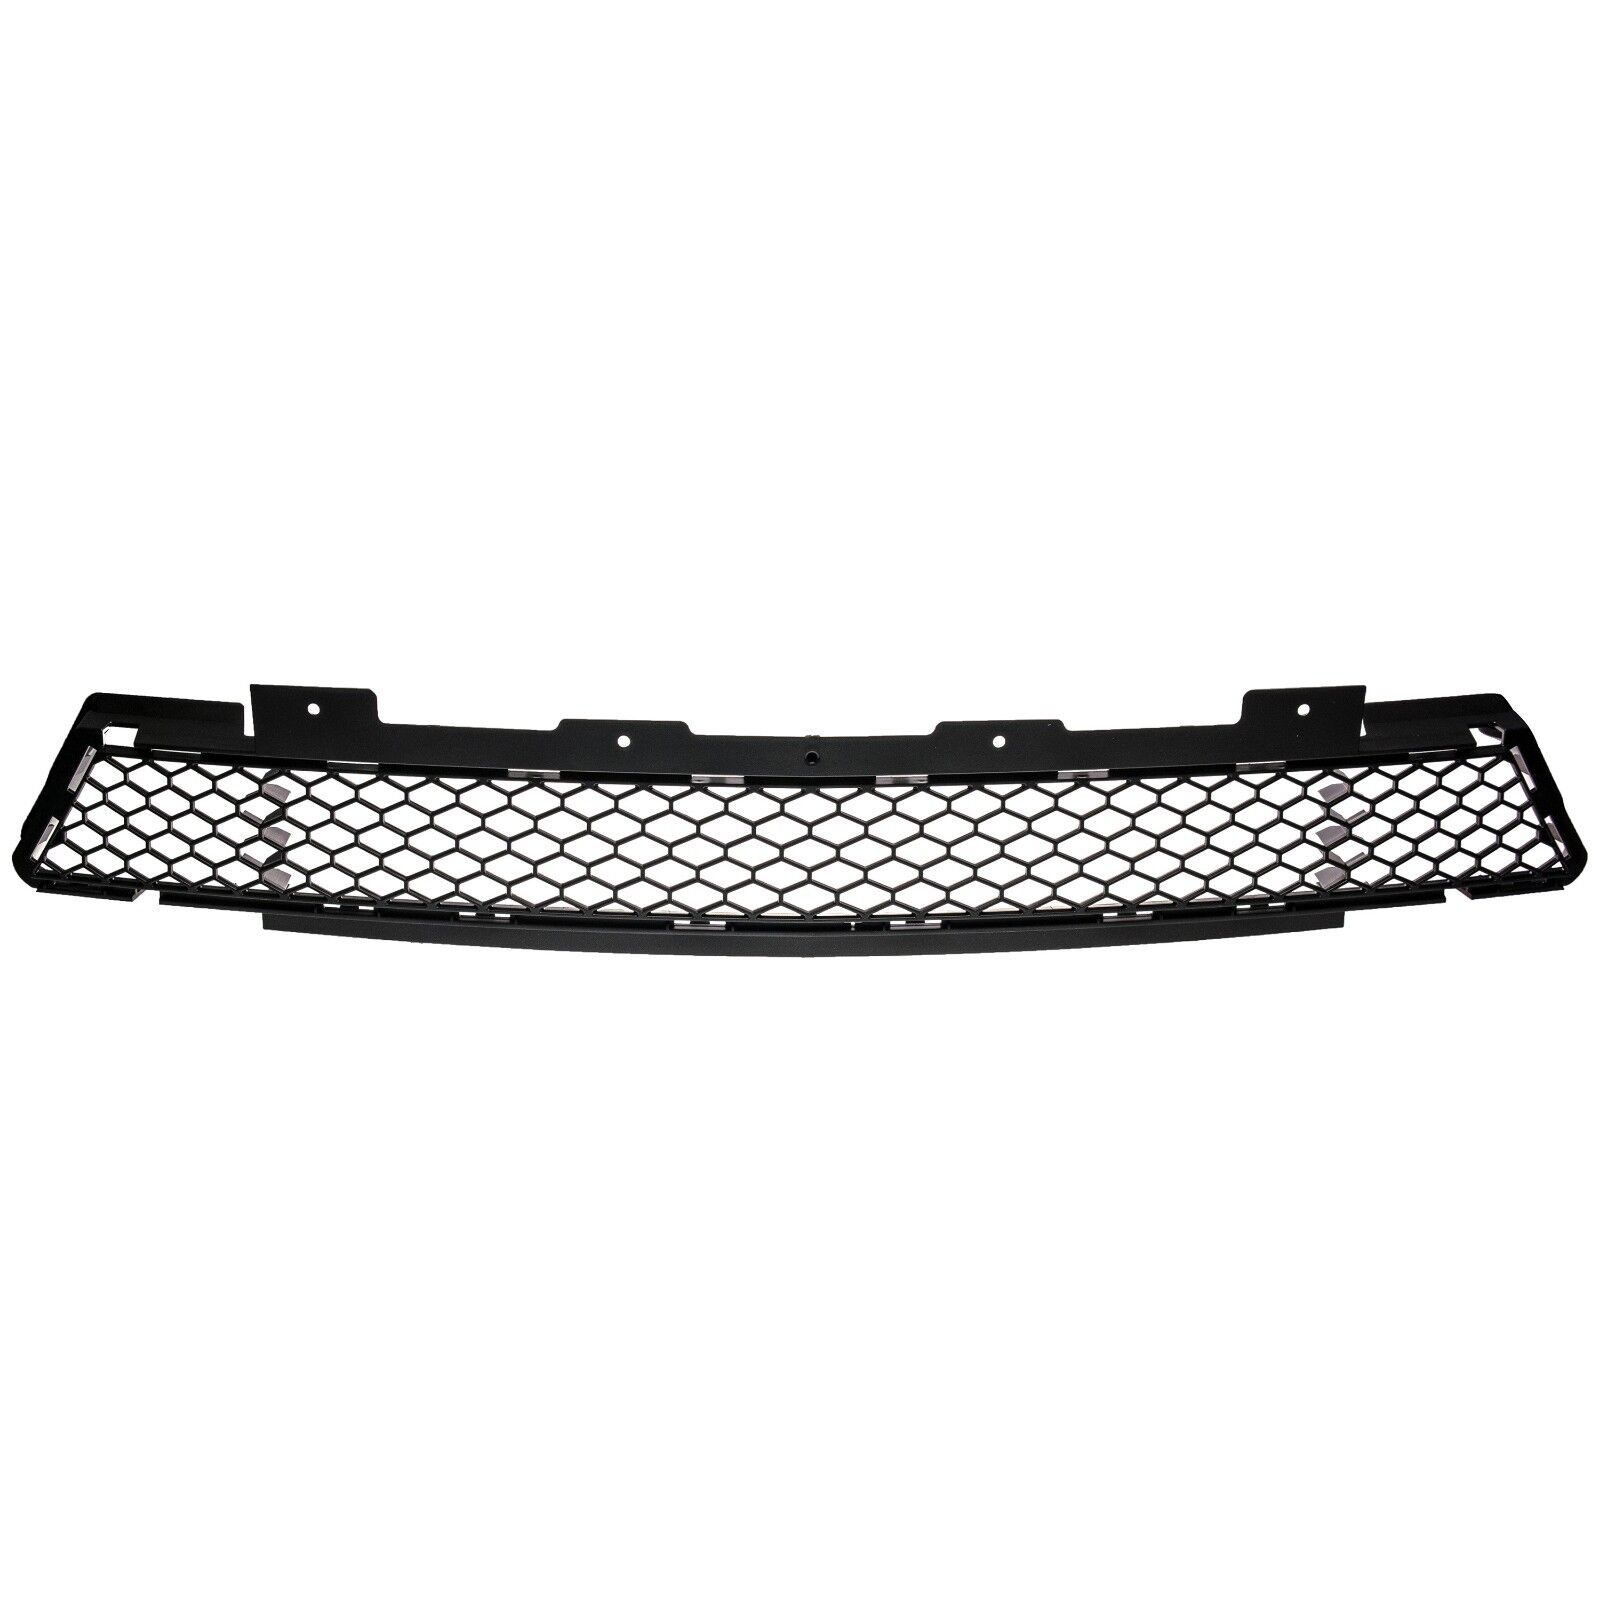 OEM NEW 2015-2019 Ford Mustang Shelby GT350 GT350R Lower Bumper Grille Insert